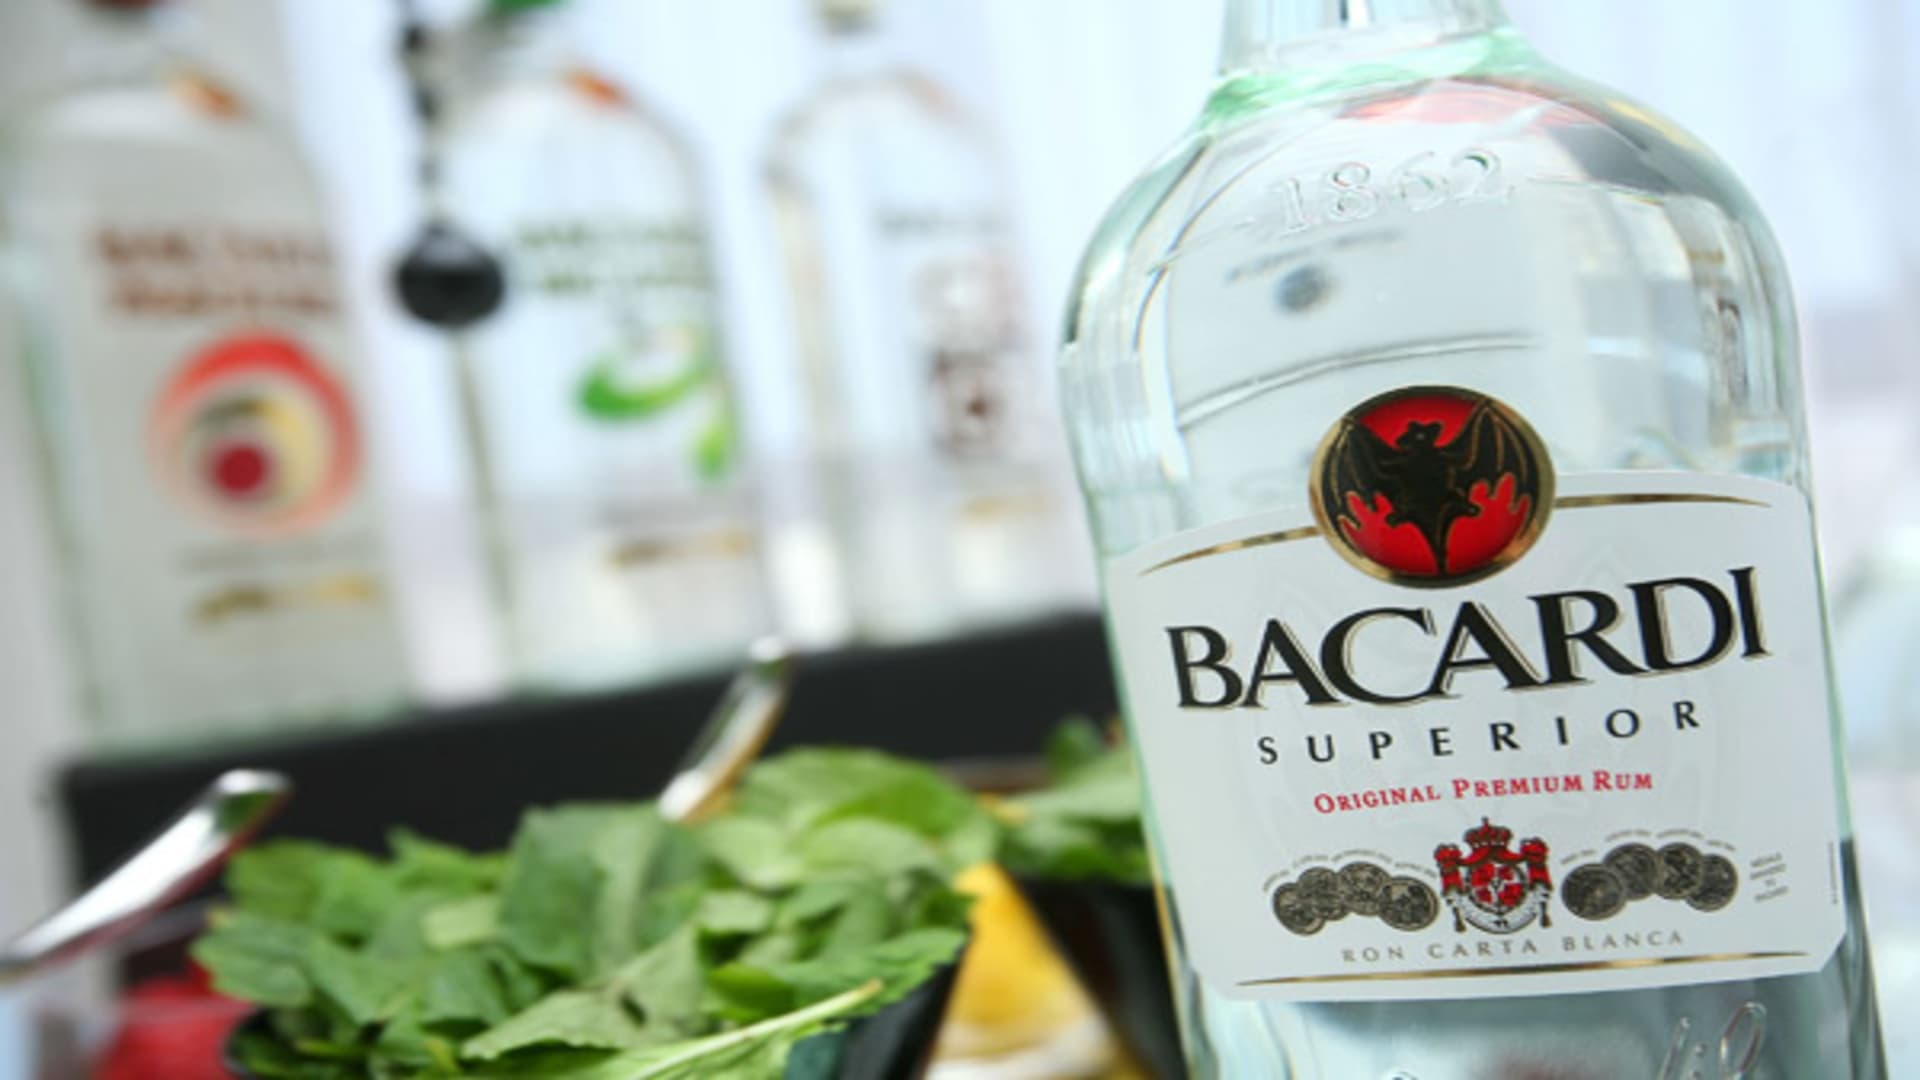 Bacardi remains one of the few major family-controlled drink companies and is synonymous with rum, distributing the spirit to over 100 countries.